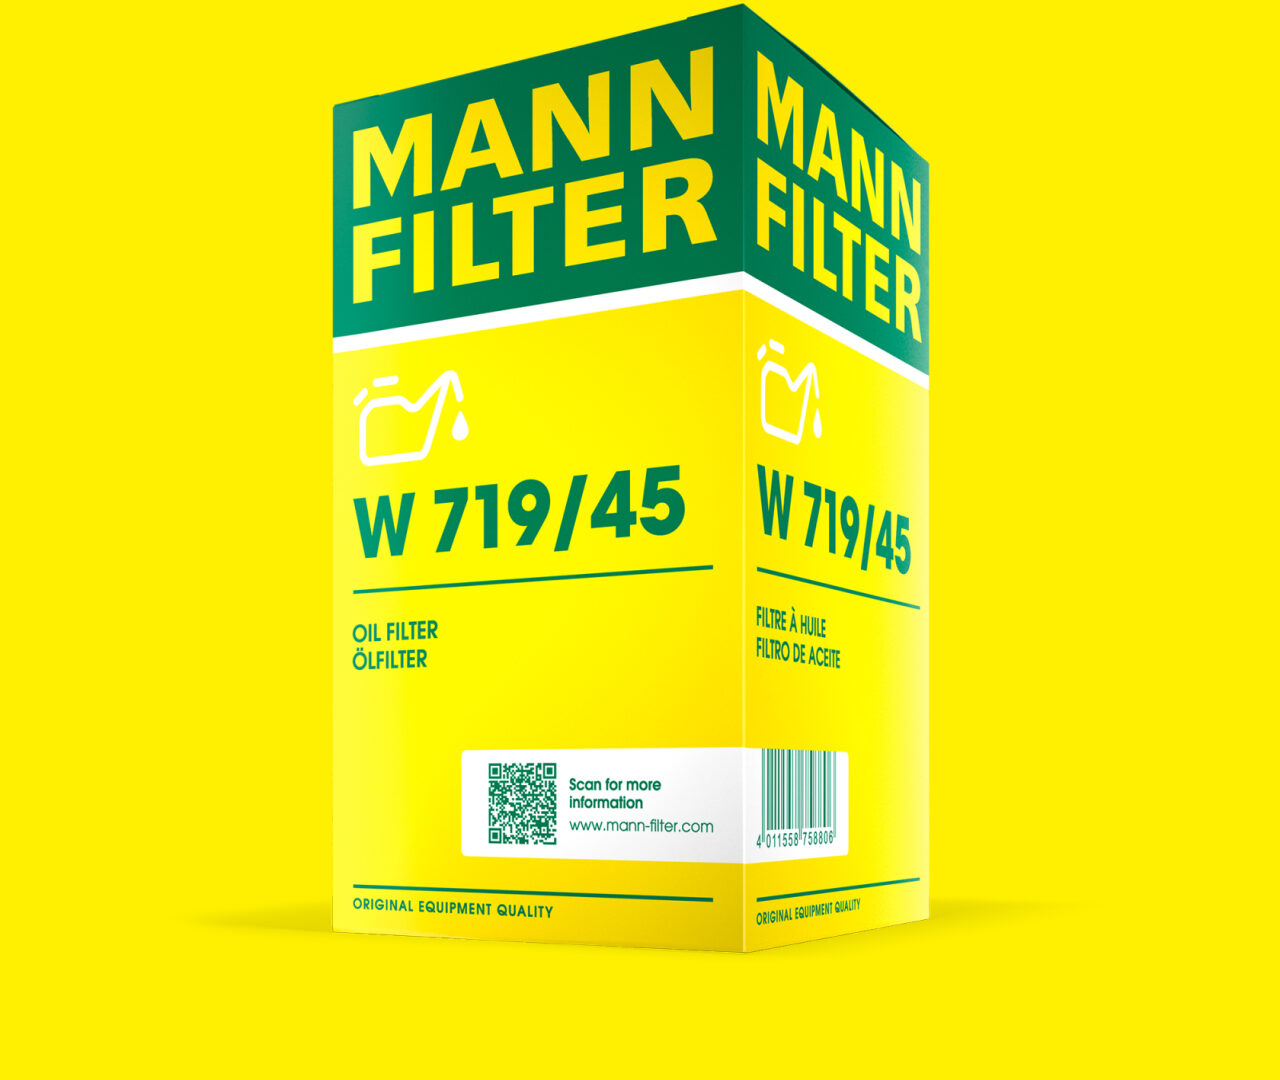 The new MANN-FILTER packaging design shown on the example oil filter packaging w719/45